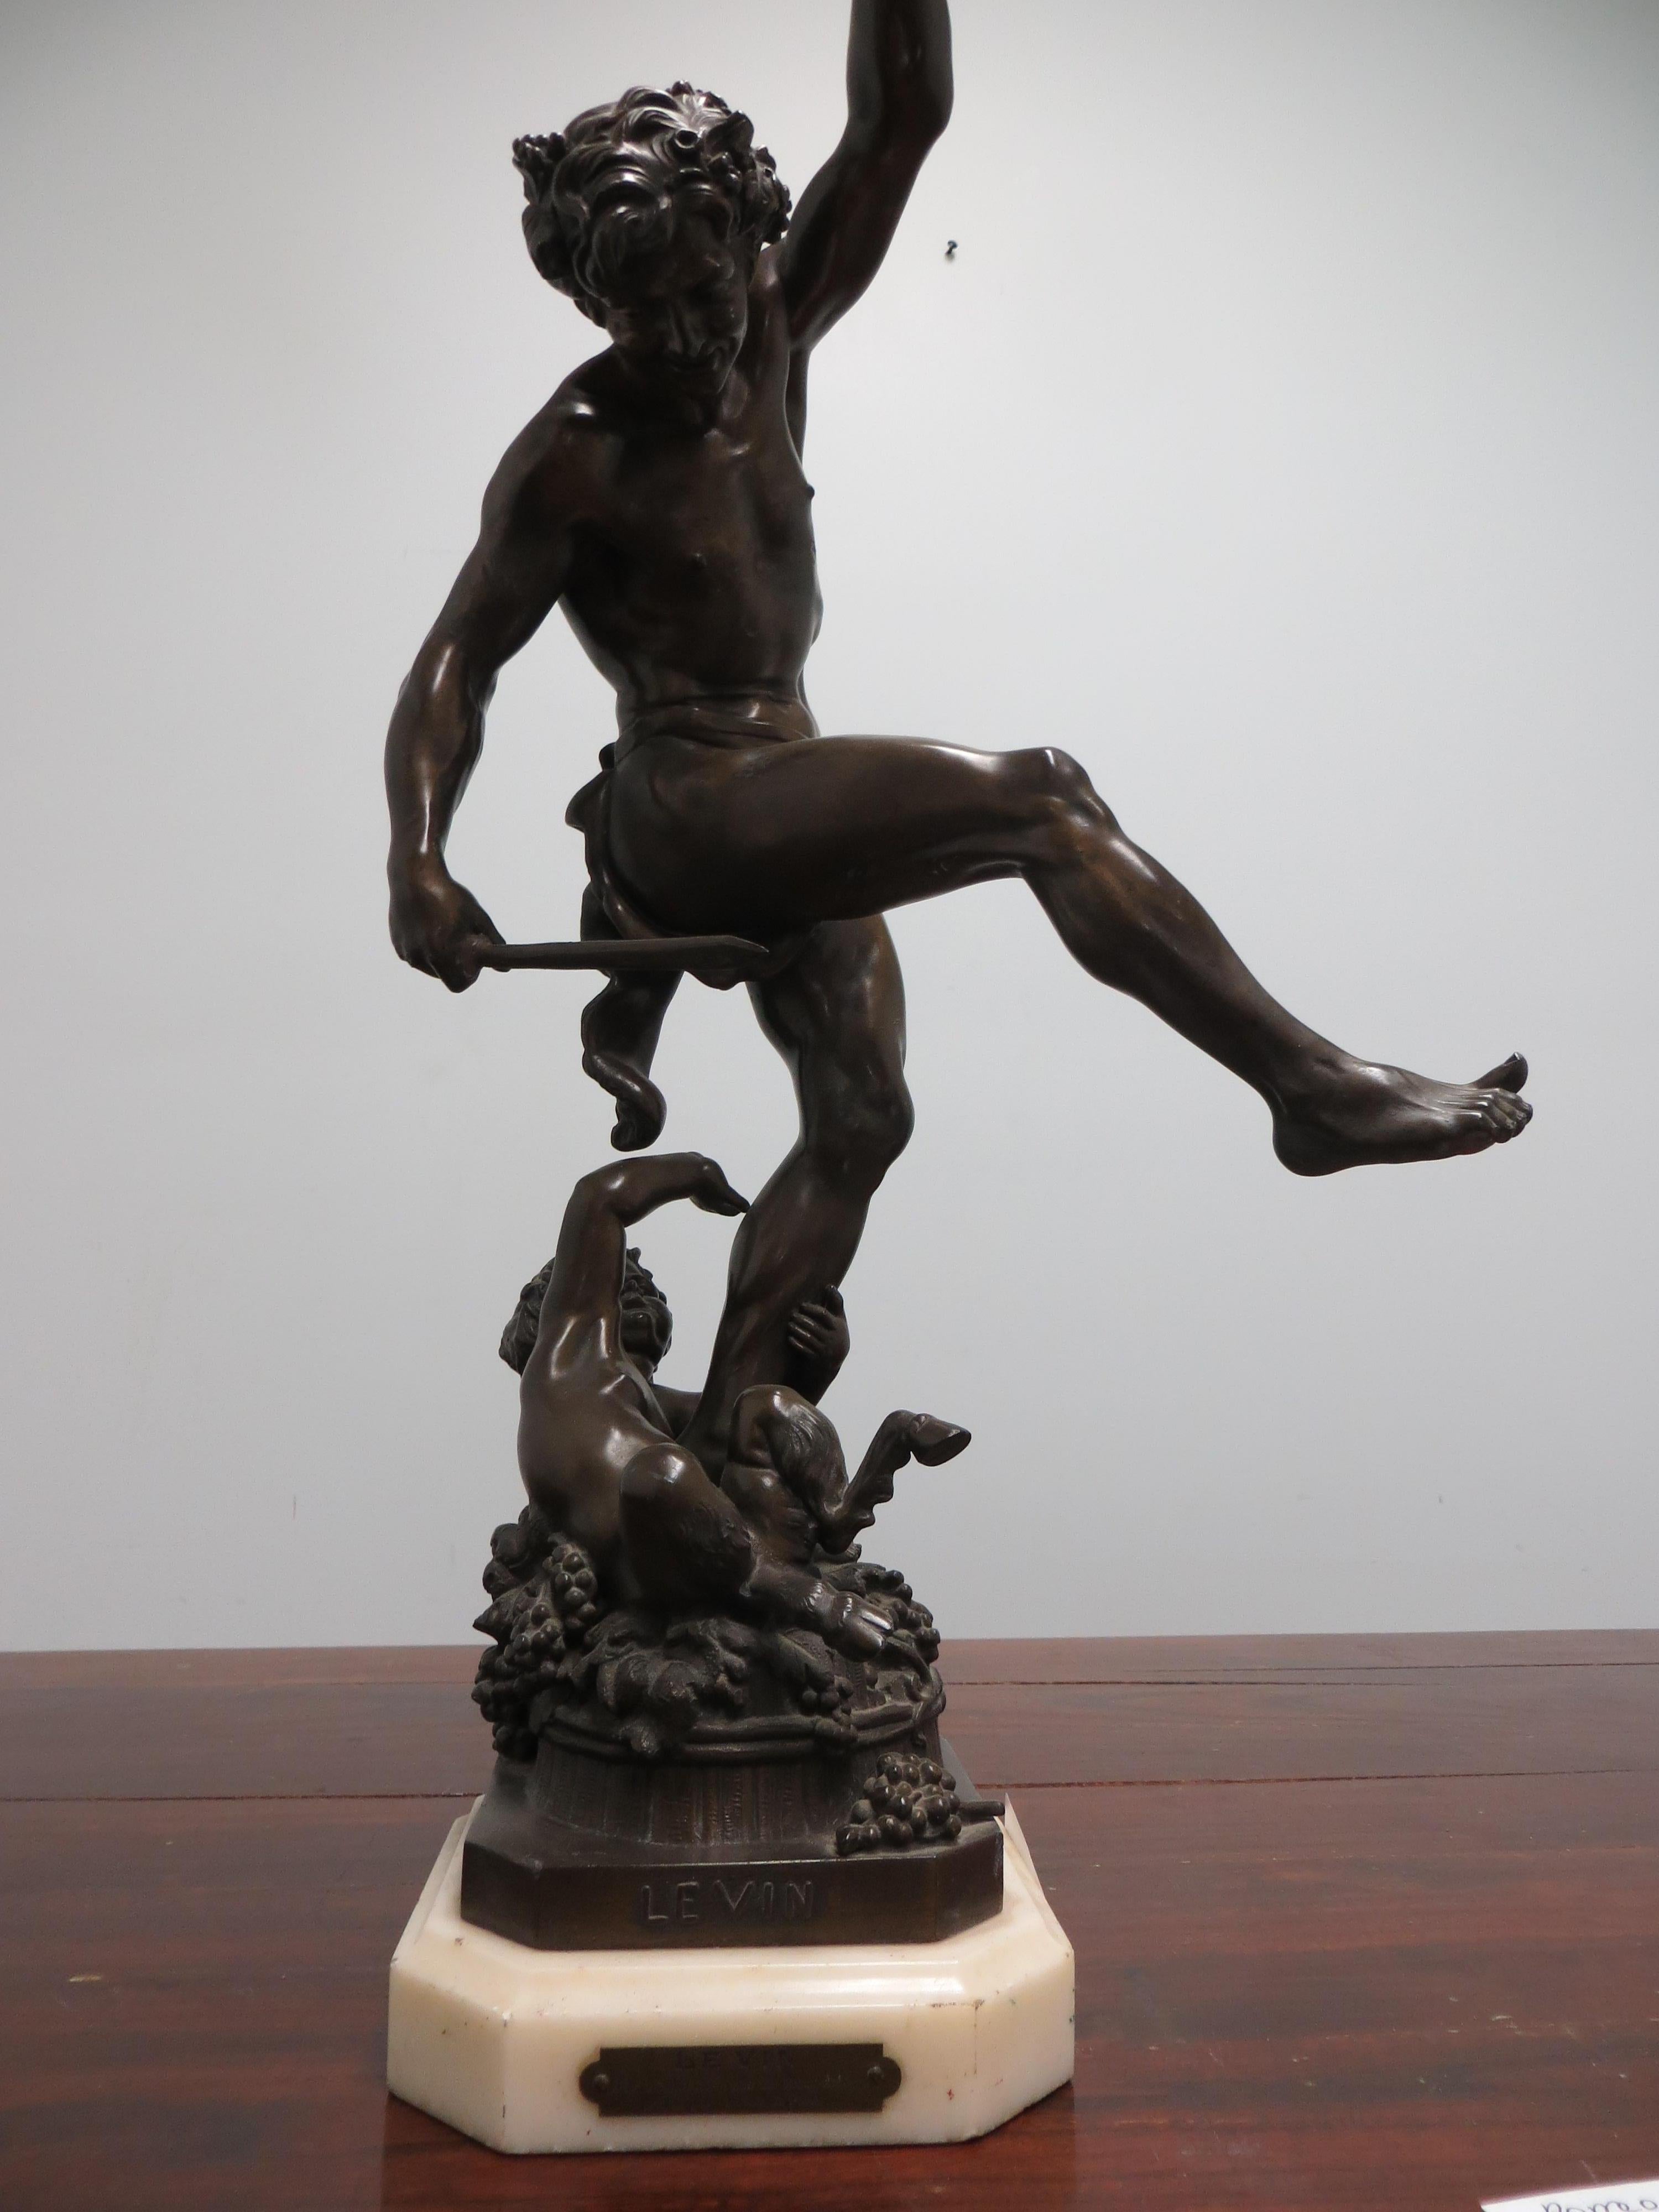  Louis Holweck Regulates Bacchus Fauna Sculpture Statue Faun Wine. Spelter with brown patina signed Louis Holweck (1861-1935) entitled Le Vin. ...
Bronze, 